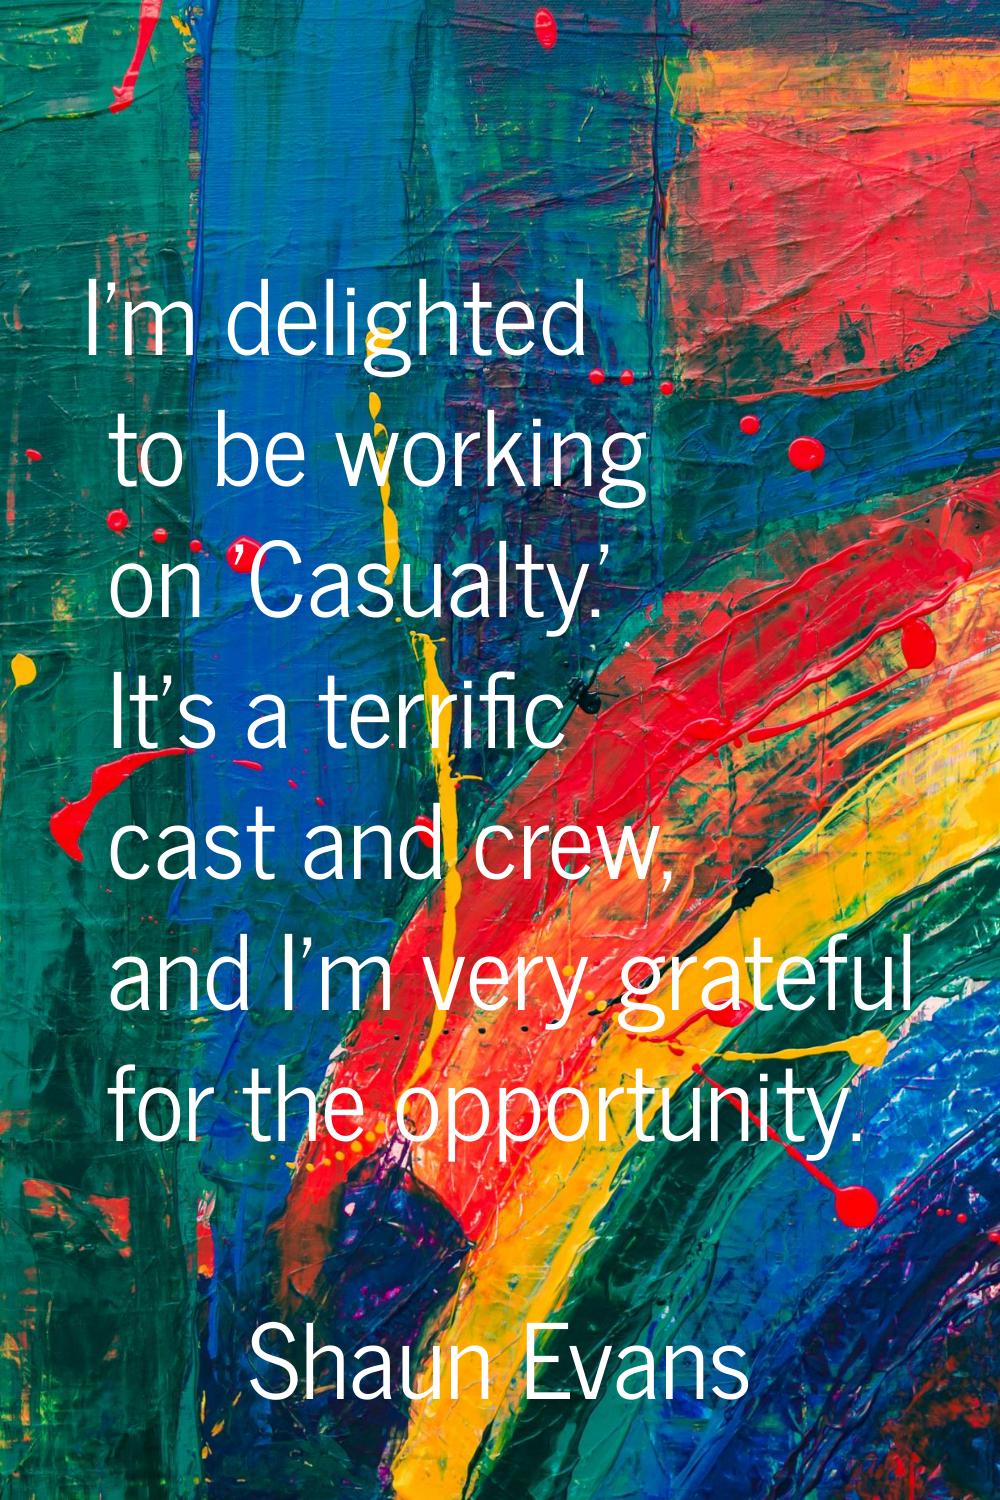 I'm delighted to be working on 'Casualty.' It's a terrific cast and crew, and I'm very grateful for